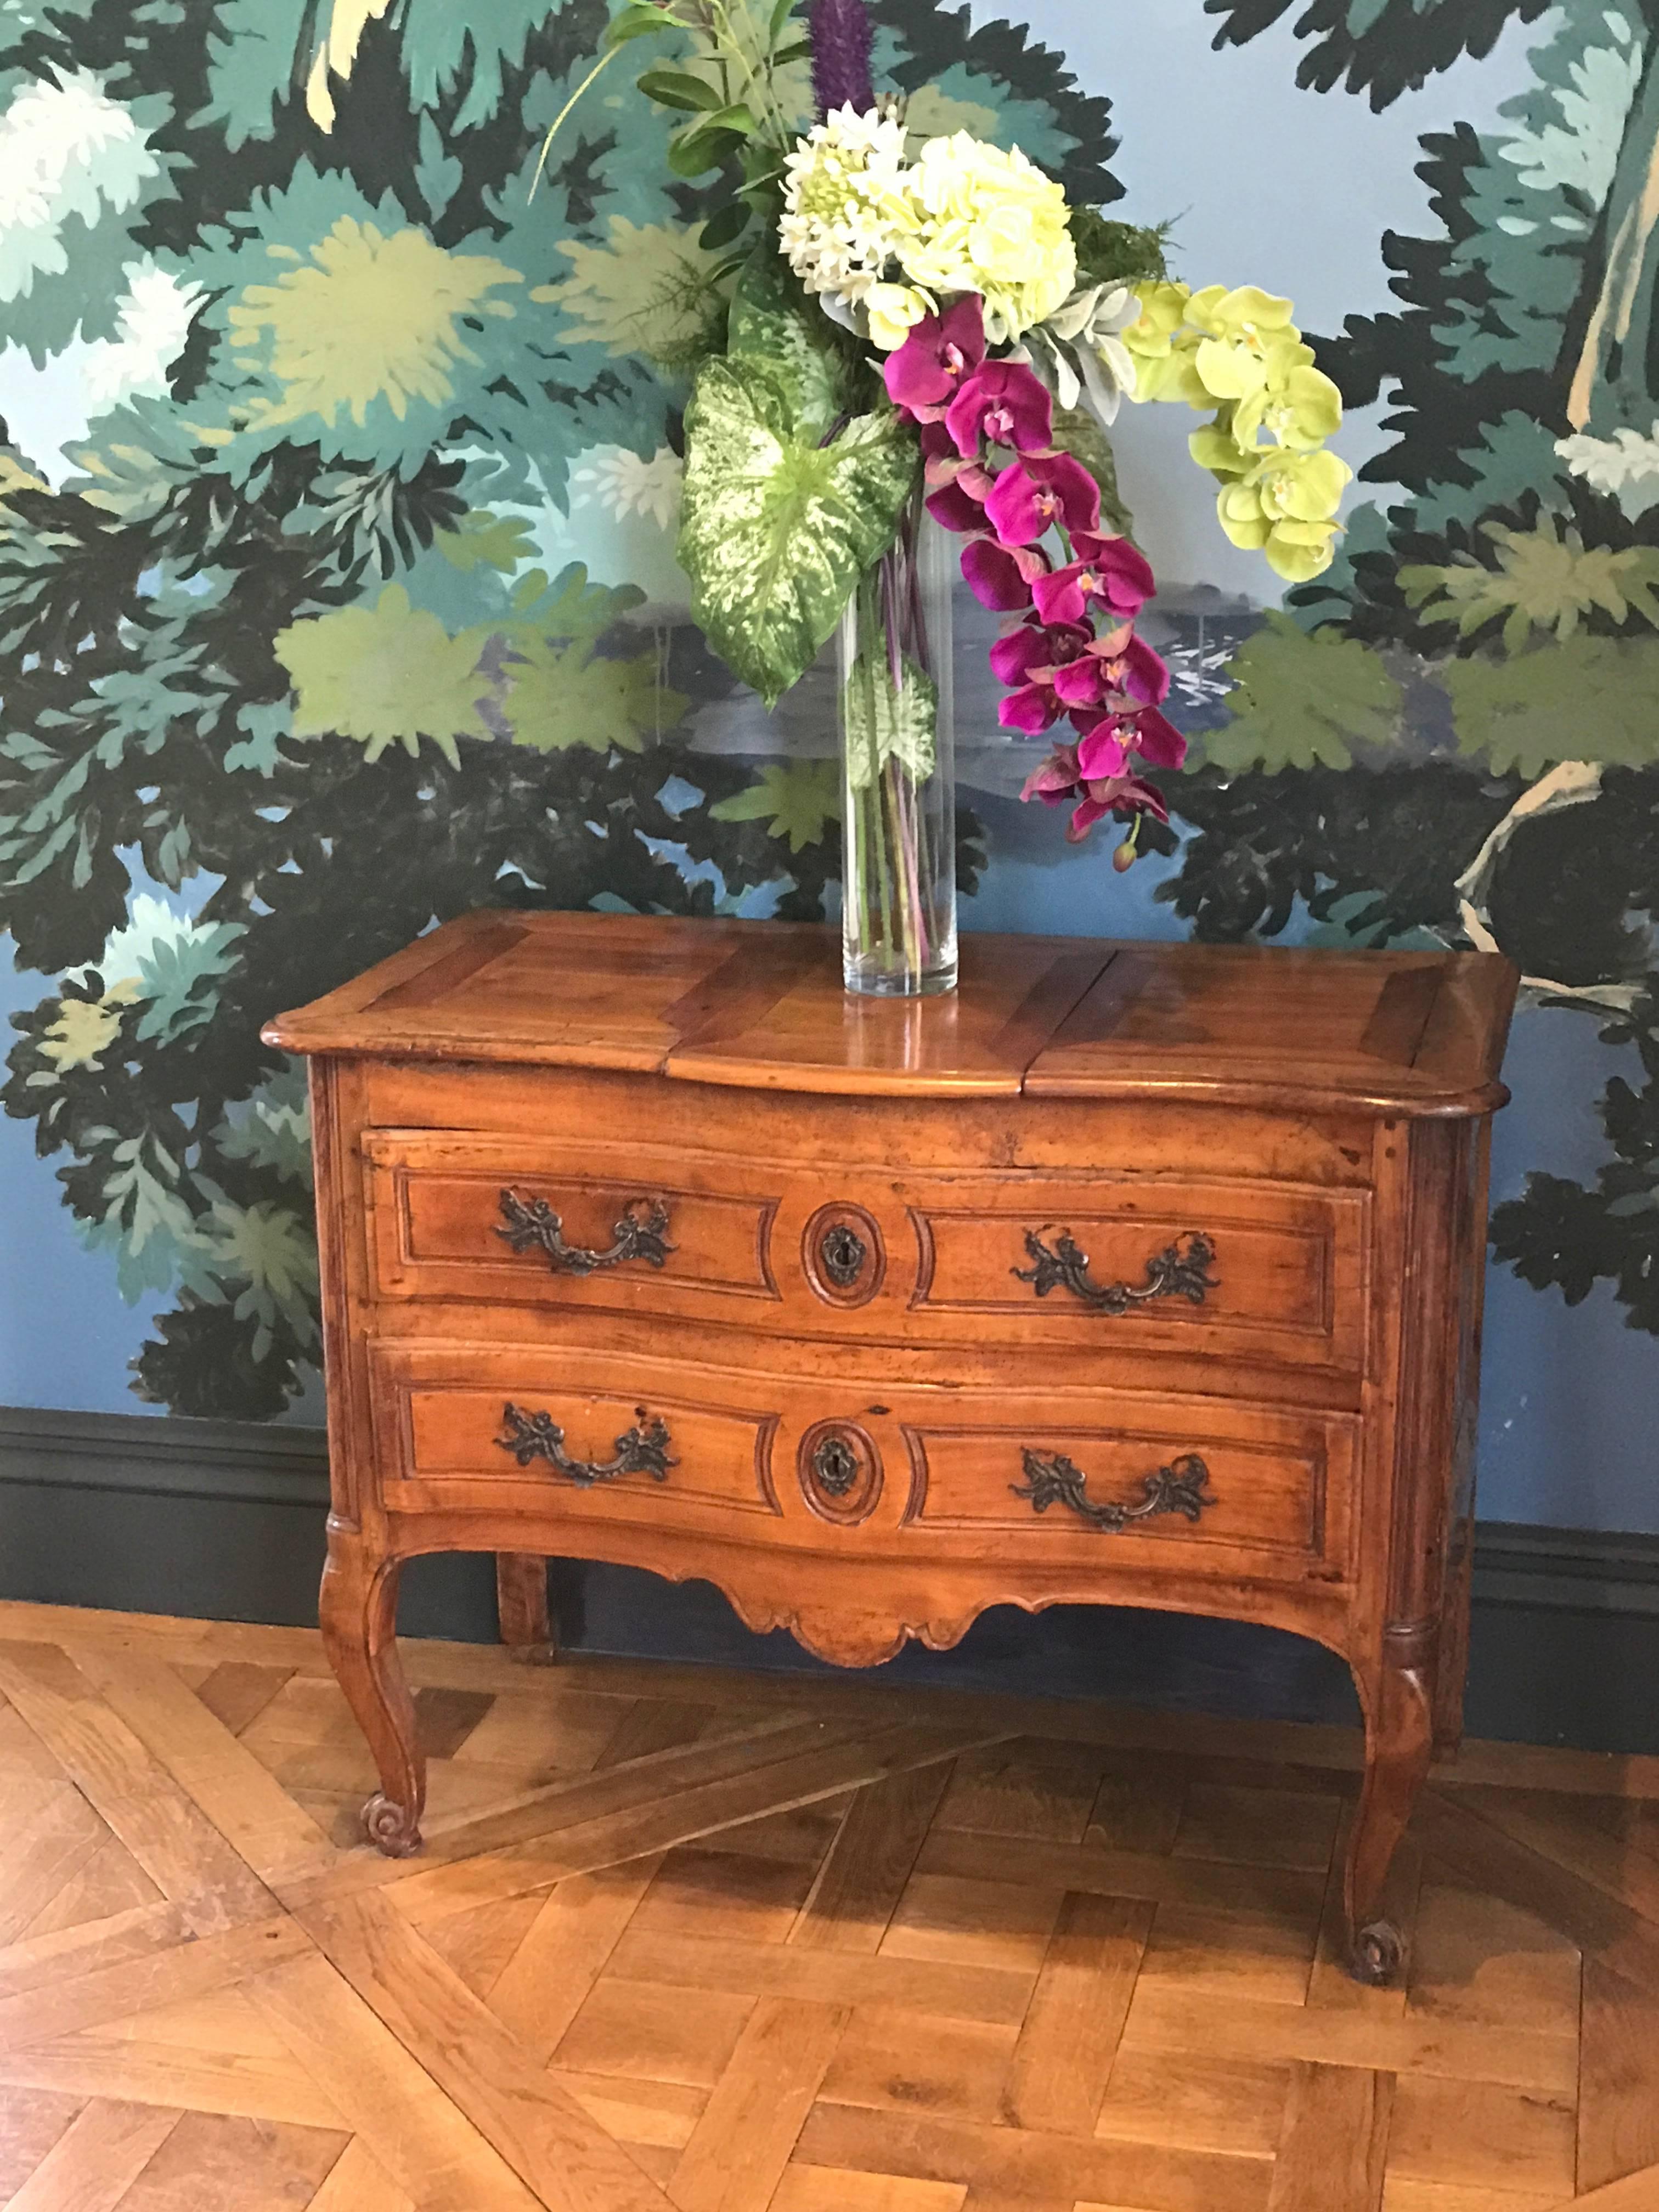 This Louis XV Period Cherry Wood Commode was hand made ca 1765.
Typically these French Provincial Commodes were made of Walnut, but in rare cases like this one they are made of much more rare Cherrywood. 
The graceful cabriole legs are hand